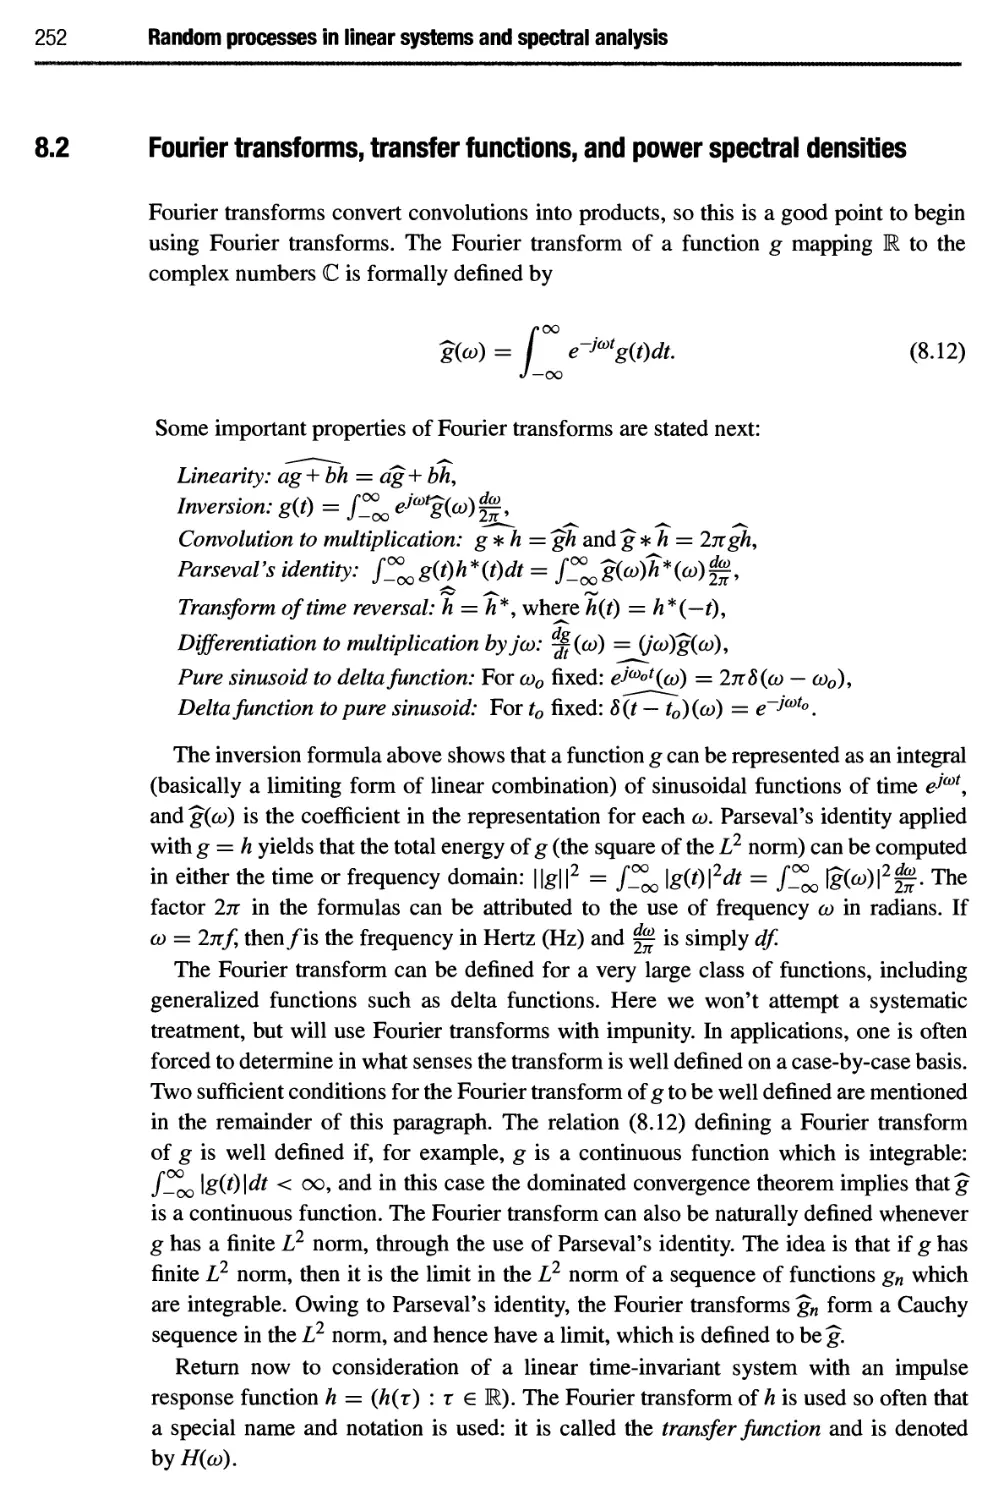 8.2 Fourier transforms, transfer functions* and power spectral densities 252